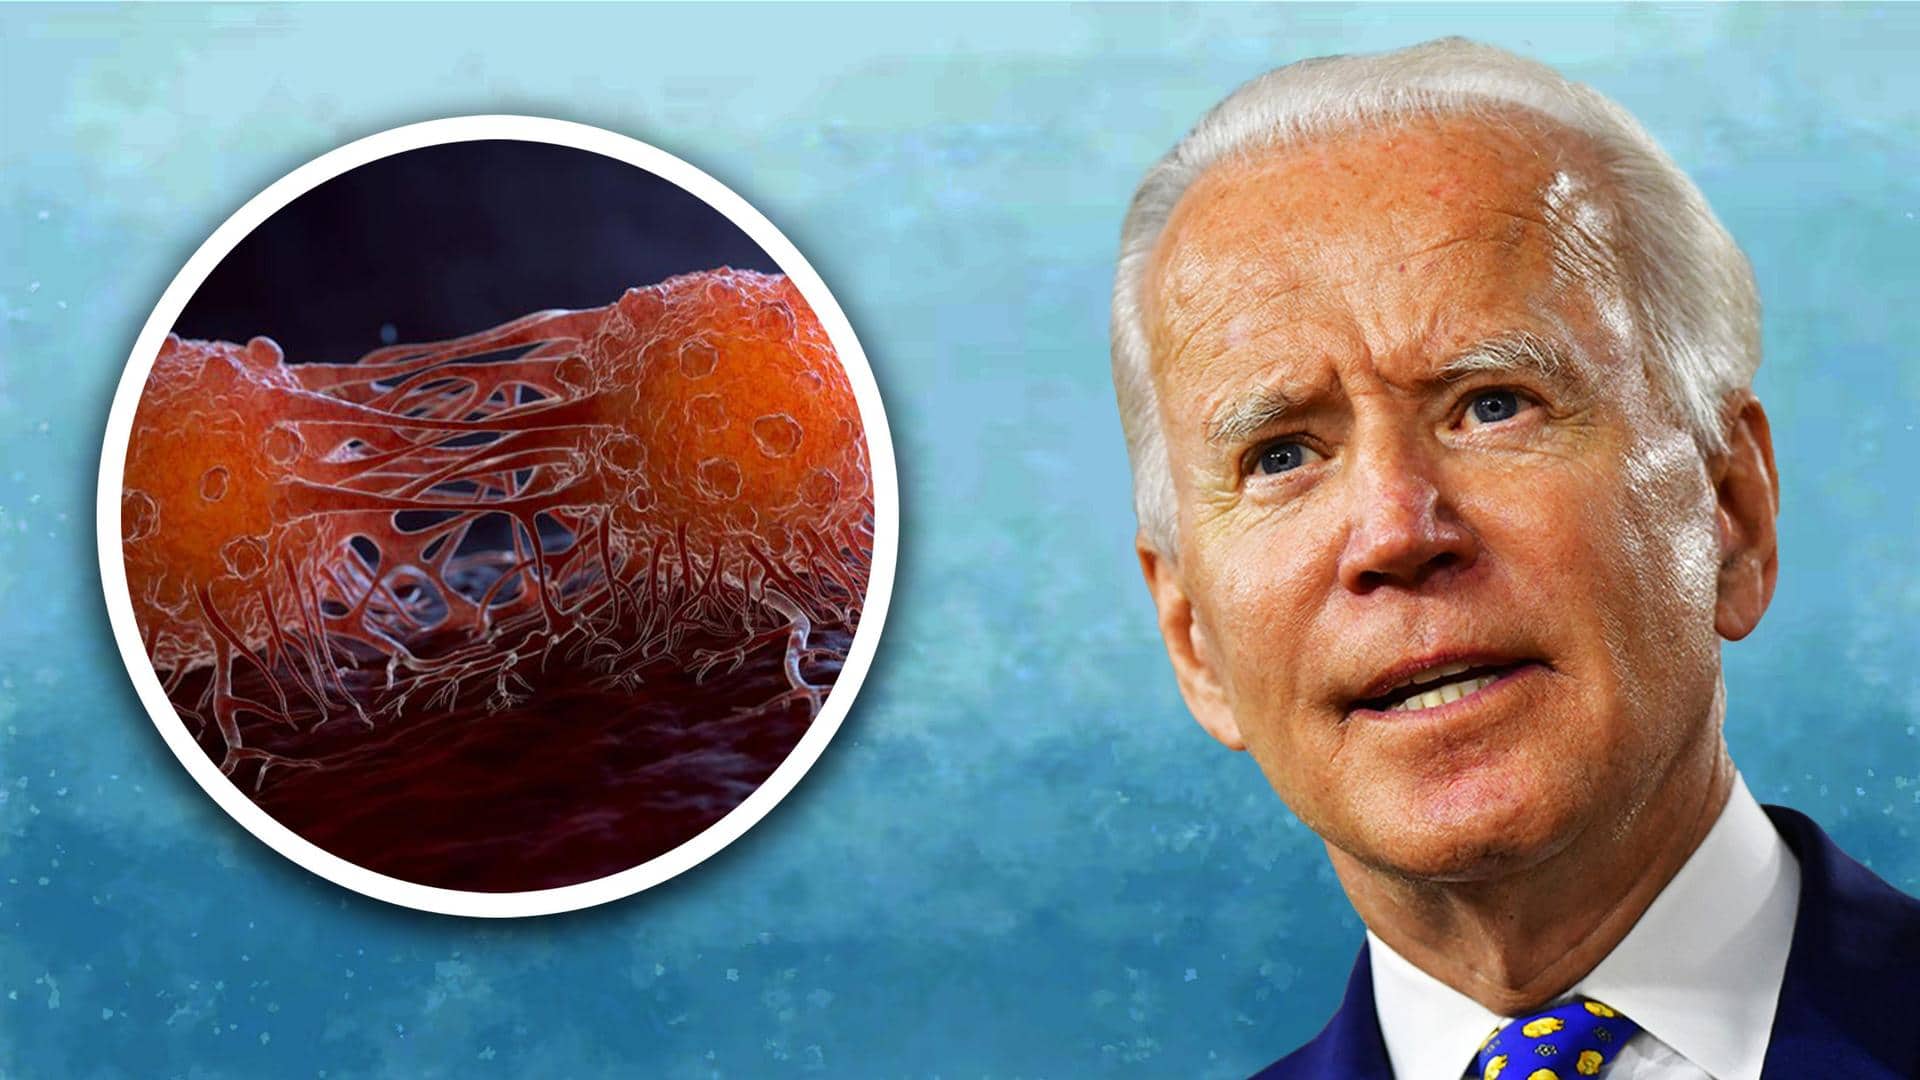 Joe Biden had cancerous skin lesion removed successfully in February